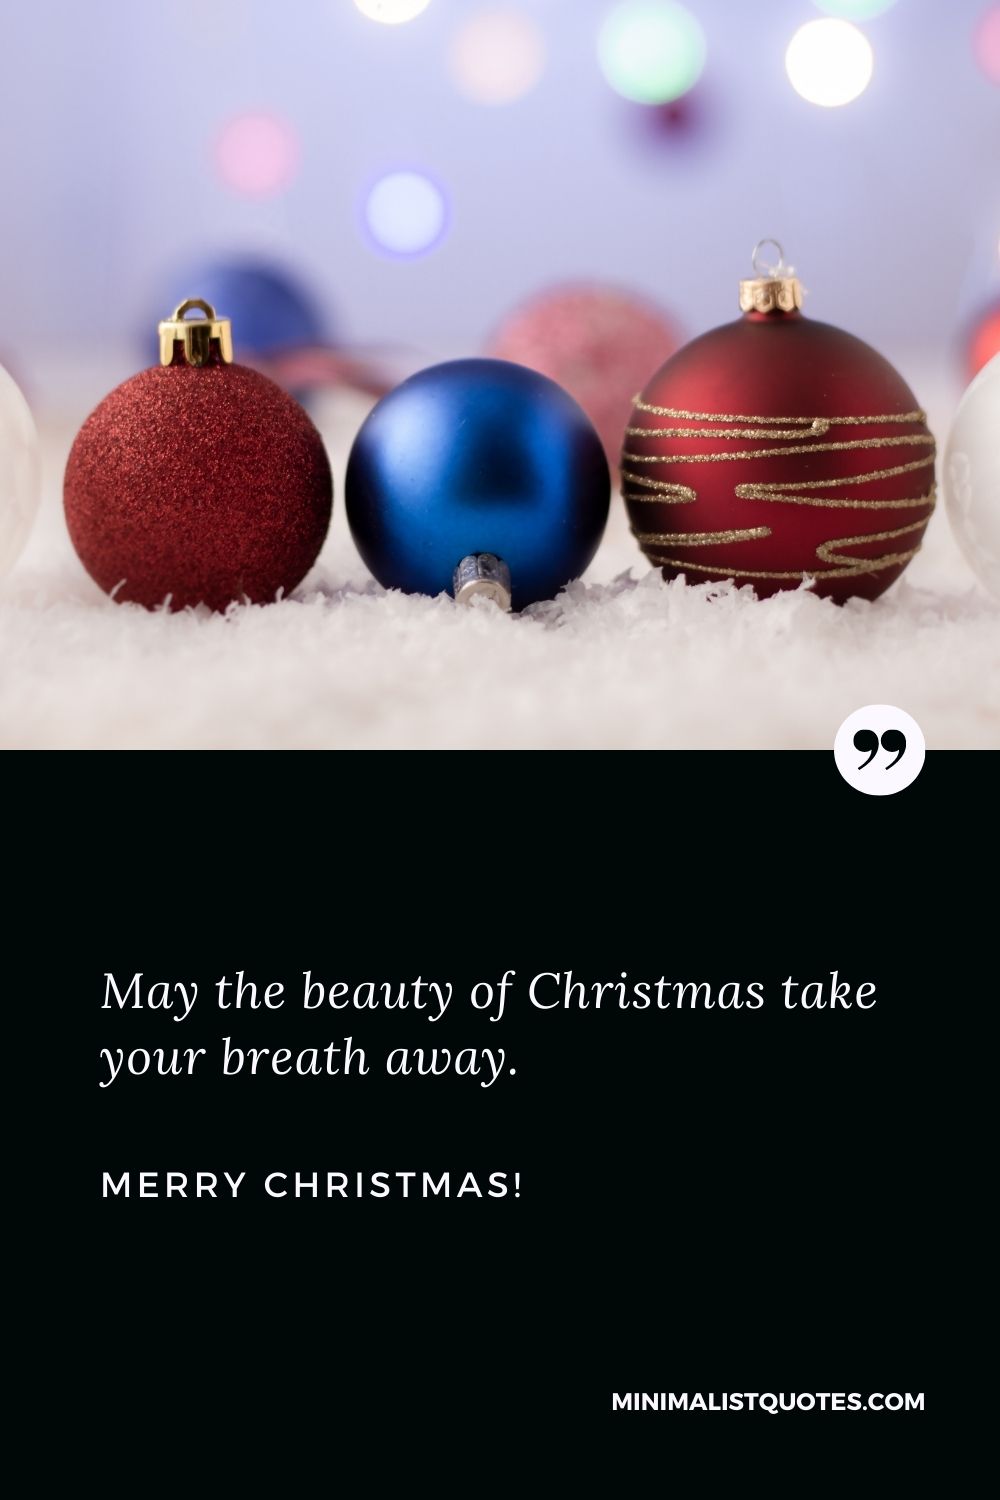 May the beauty of Christmas take your breath away. Merry Christmas!